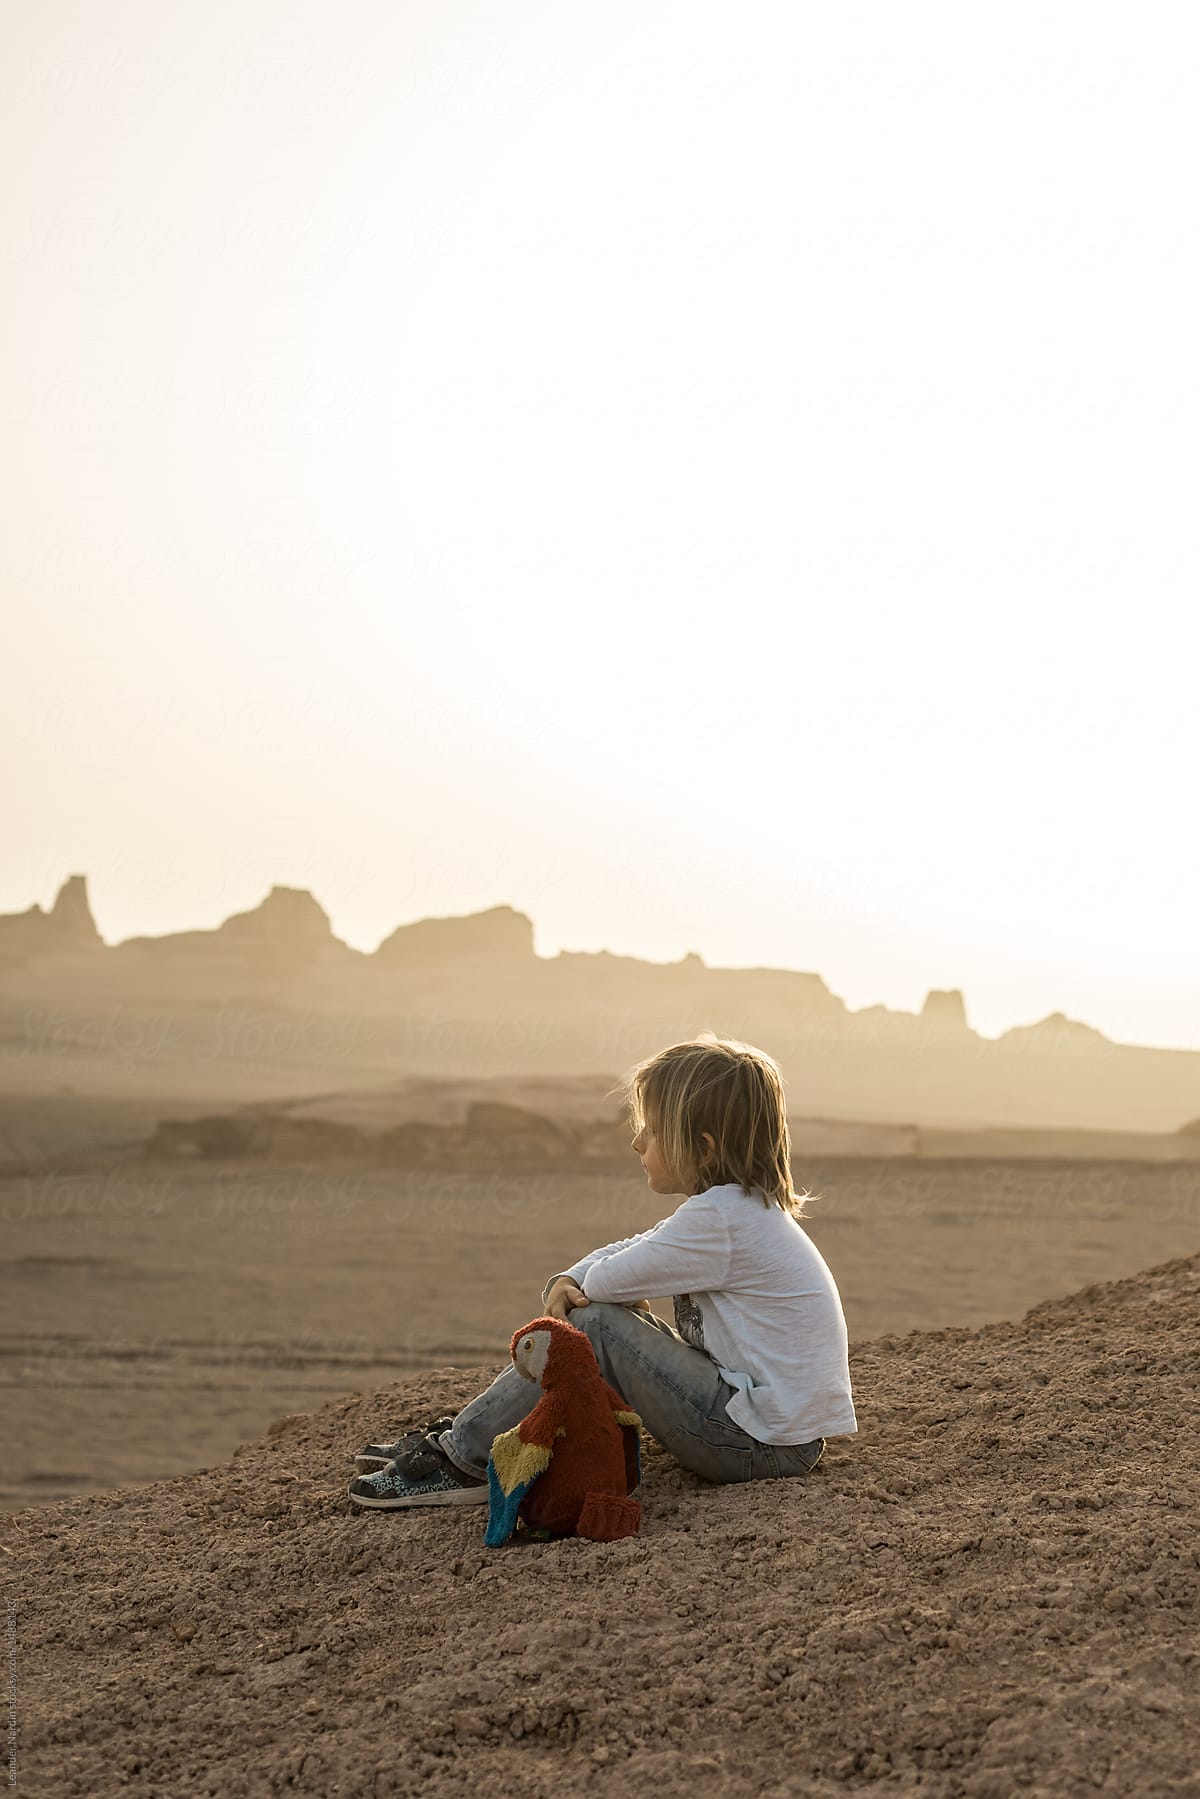 little boy and his parrot friend sitting in iranian desert landscape